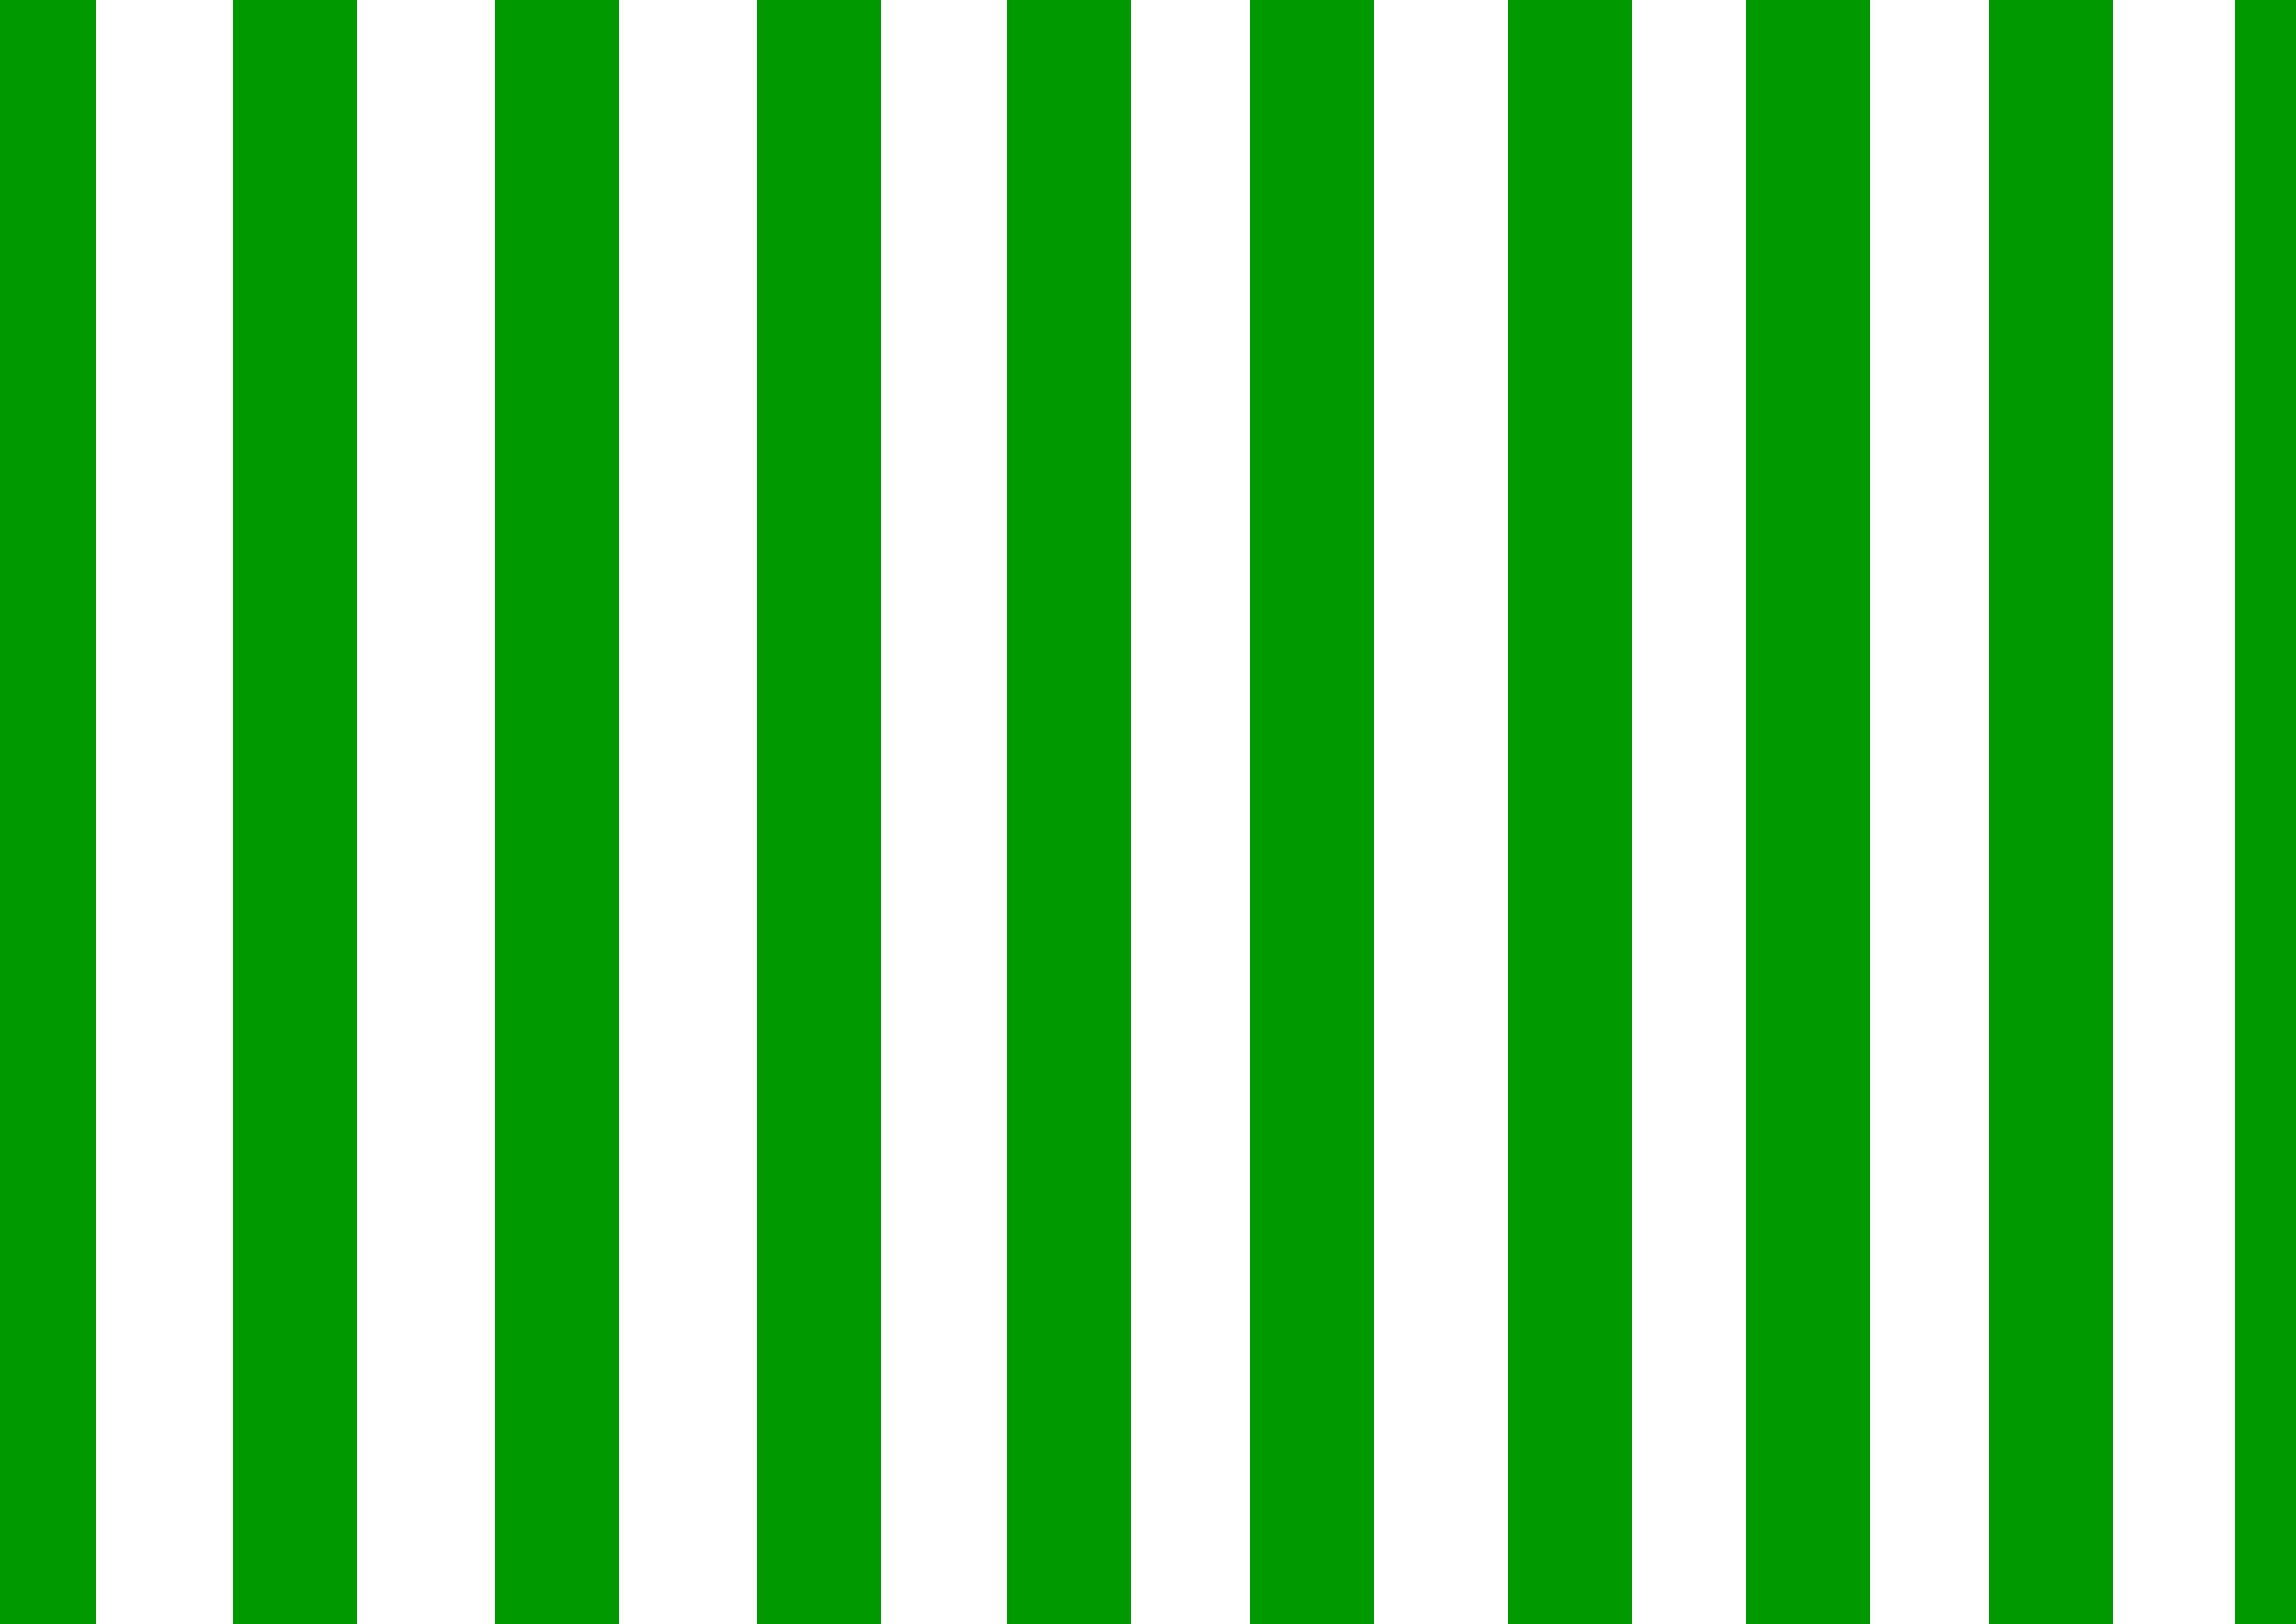 Striped Wallpaper - Green And White Striped Background - HD Wallpaper 